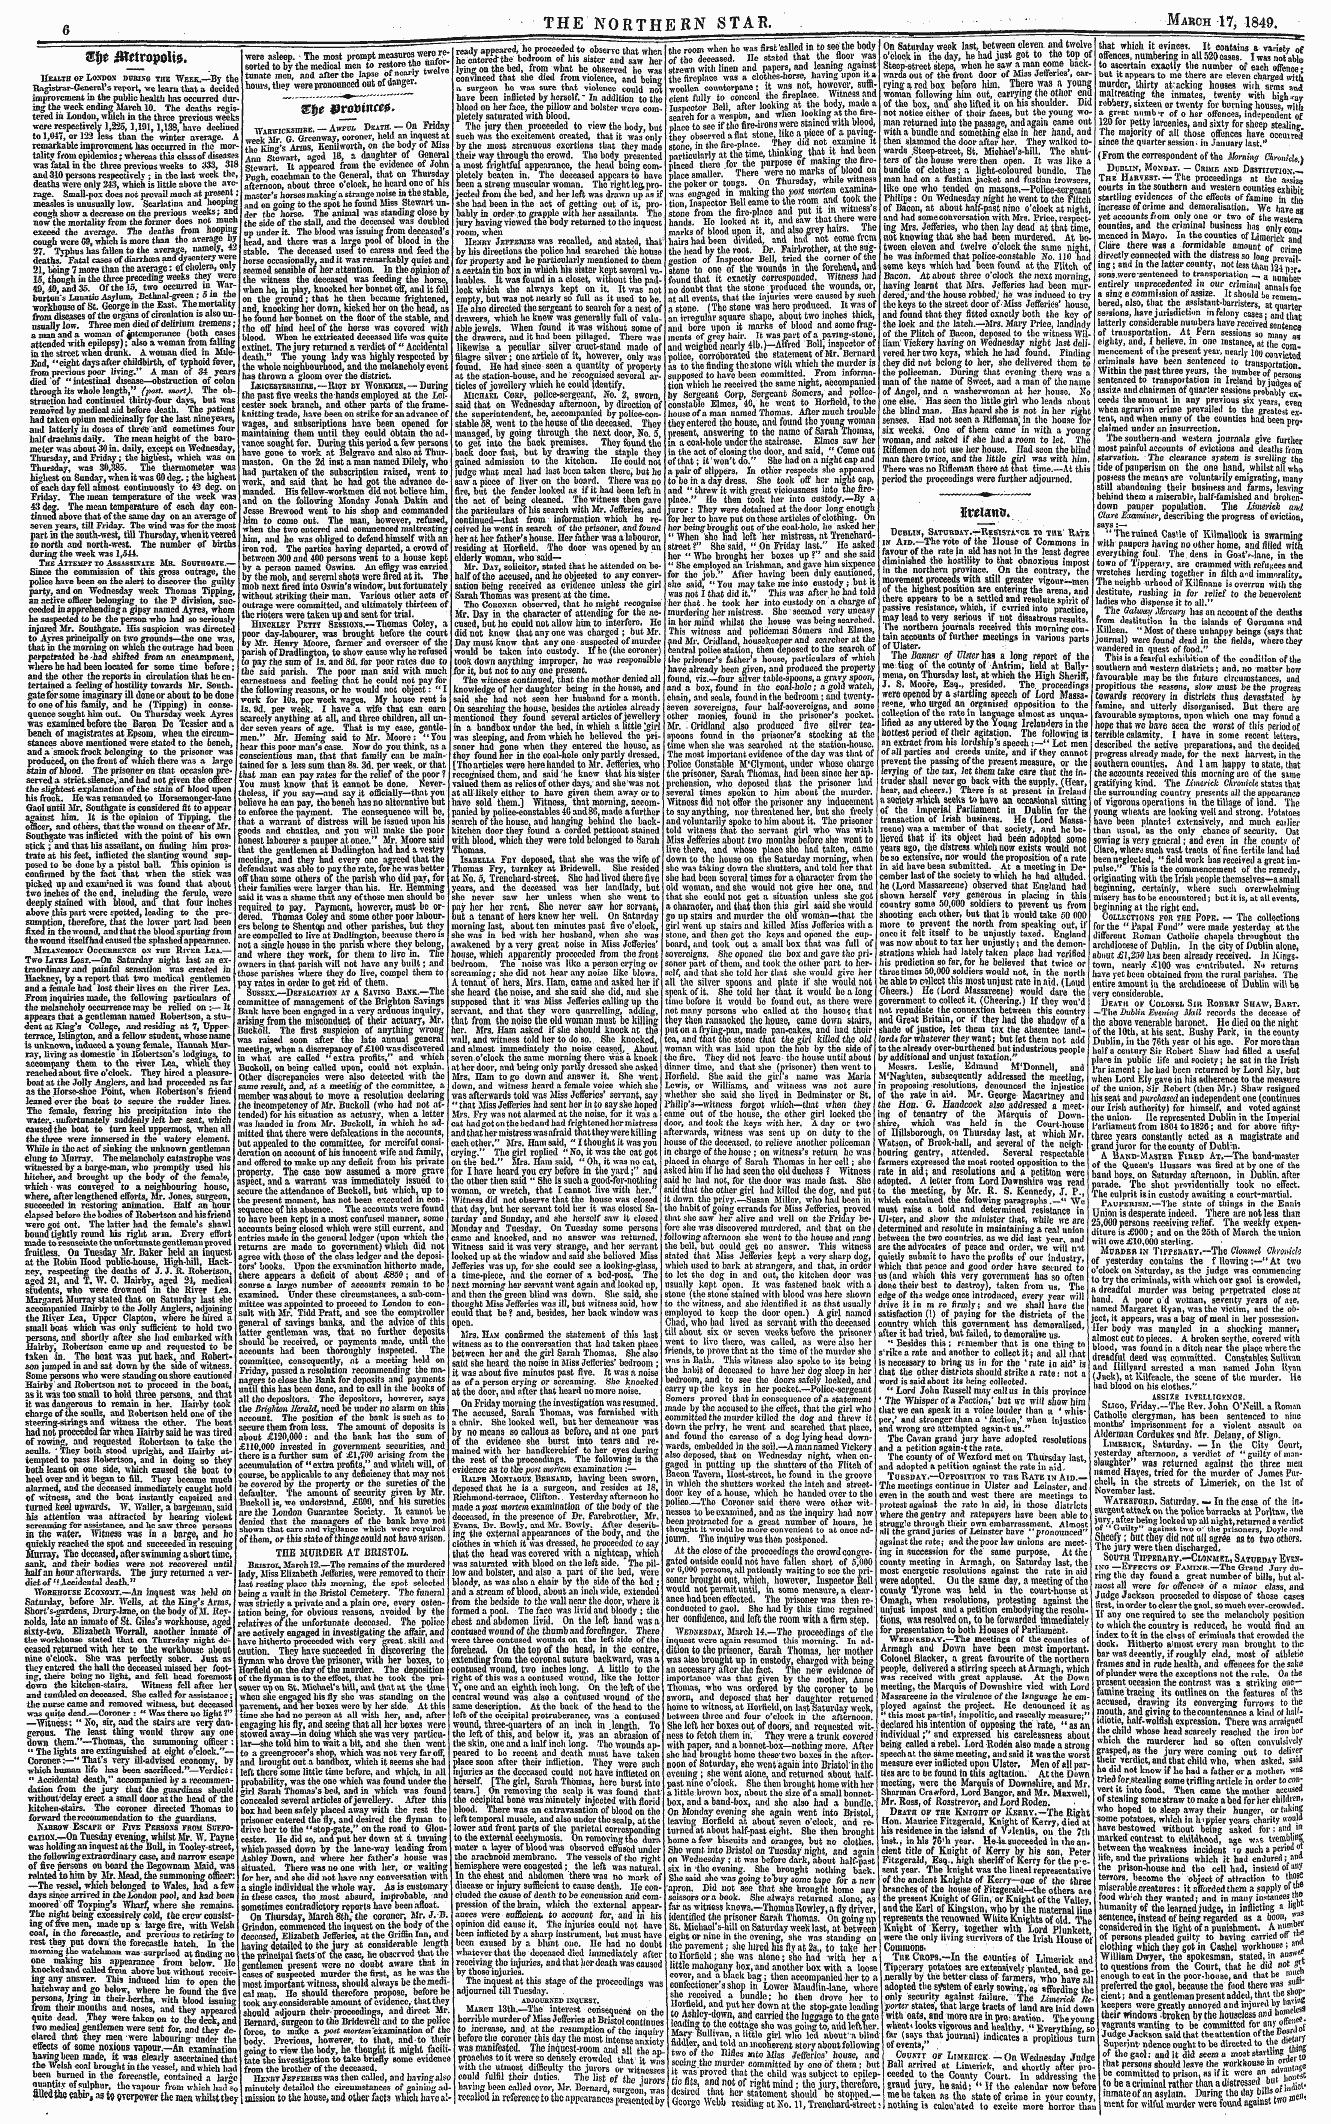 Northern Star (1837-1852): jS F Y, 2nd edition - 6 The Northern Star. March 17, 1849.